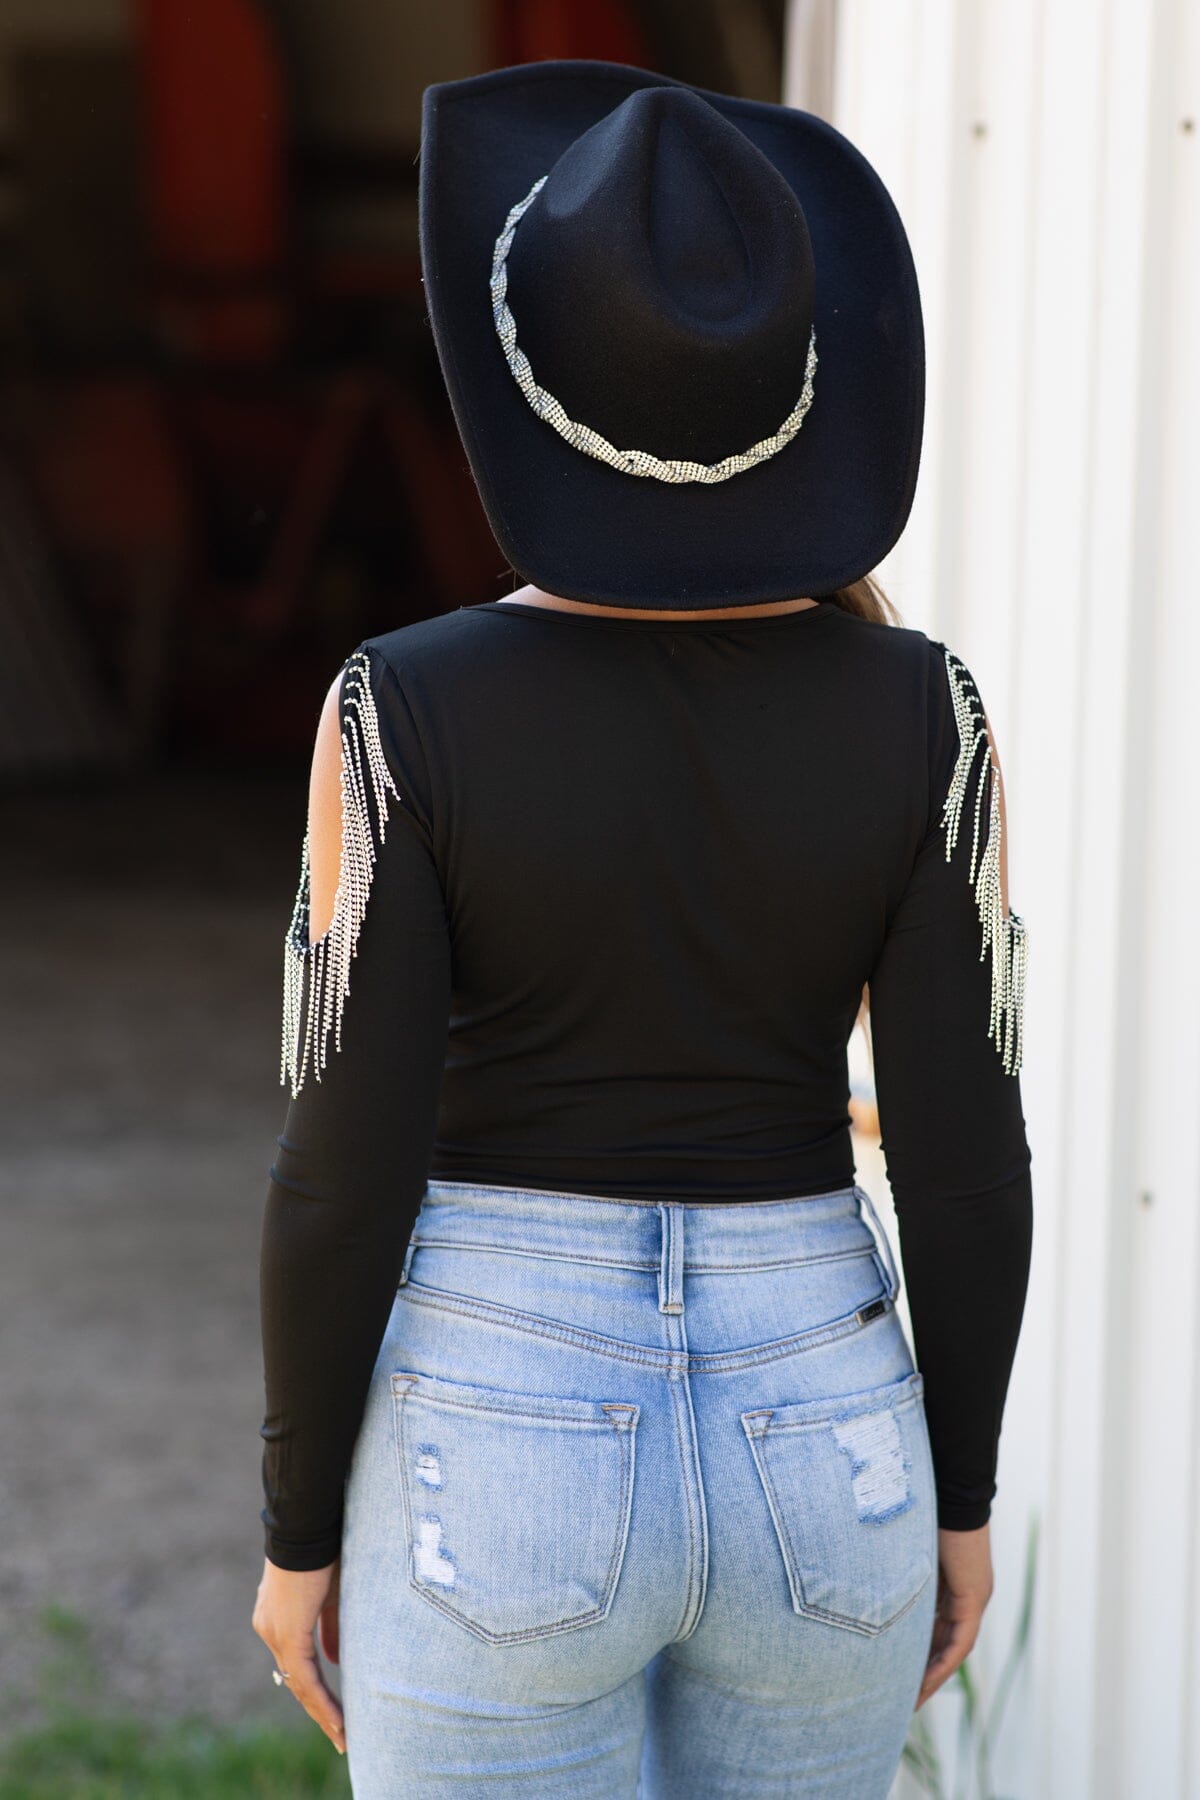 Black Bodysuit With Beaded Fringe Detail - Filly Flair